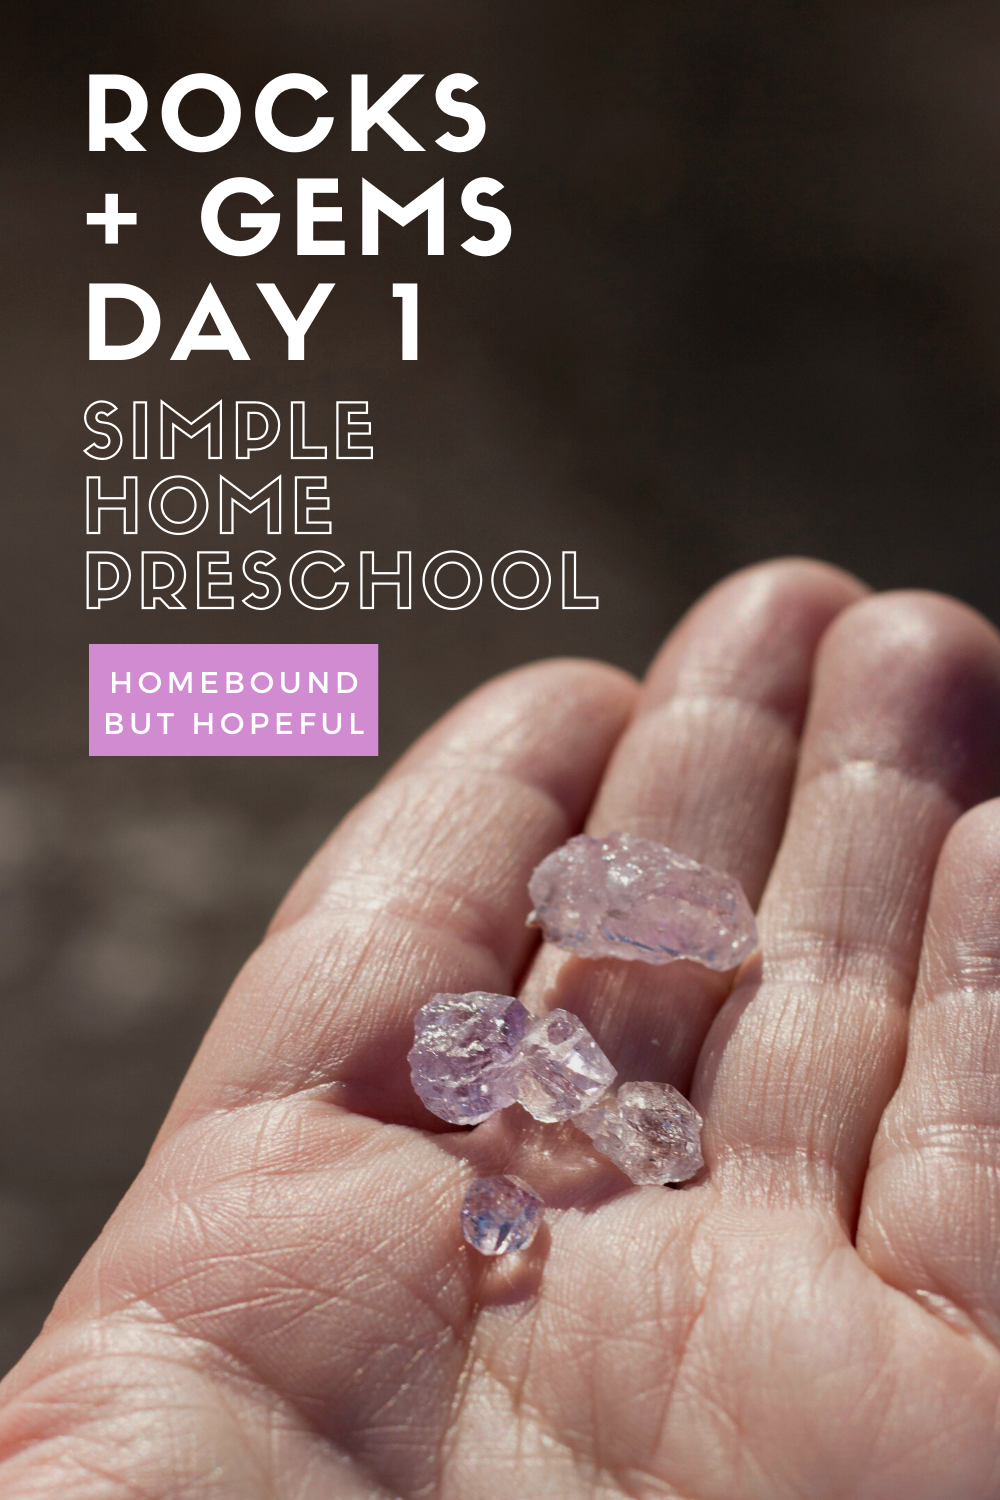 Don't miss these ideas and resources for simple home preschool ideas, centered around learning about rocks, gems, crystals. #homeschool #preschool #preschooler #preschoolideas #preschoolactivities #totschool #rocks #gems #crystals 